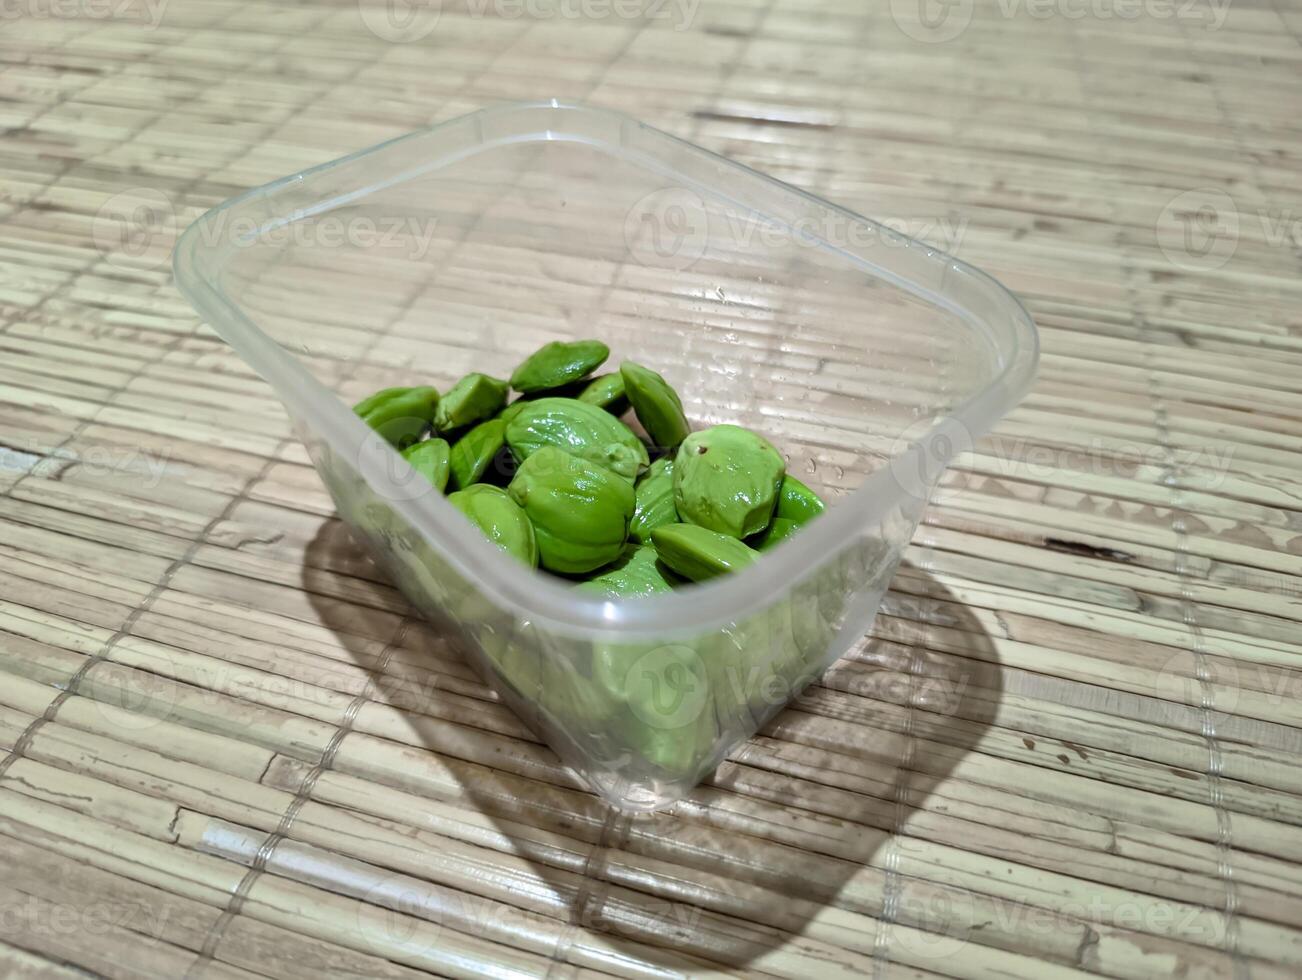 Petai seeds in a transparent container photo